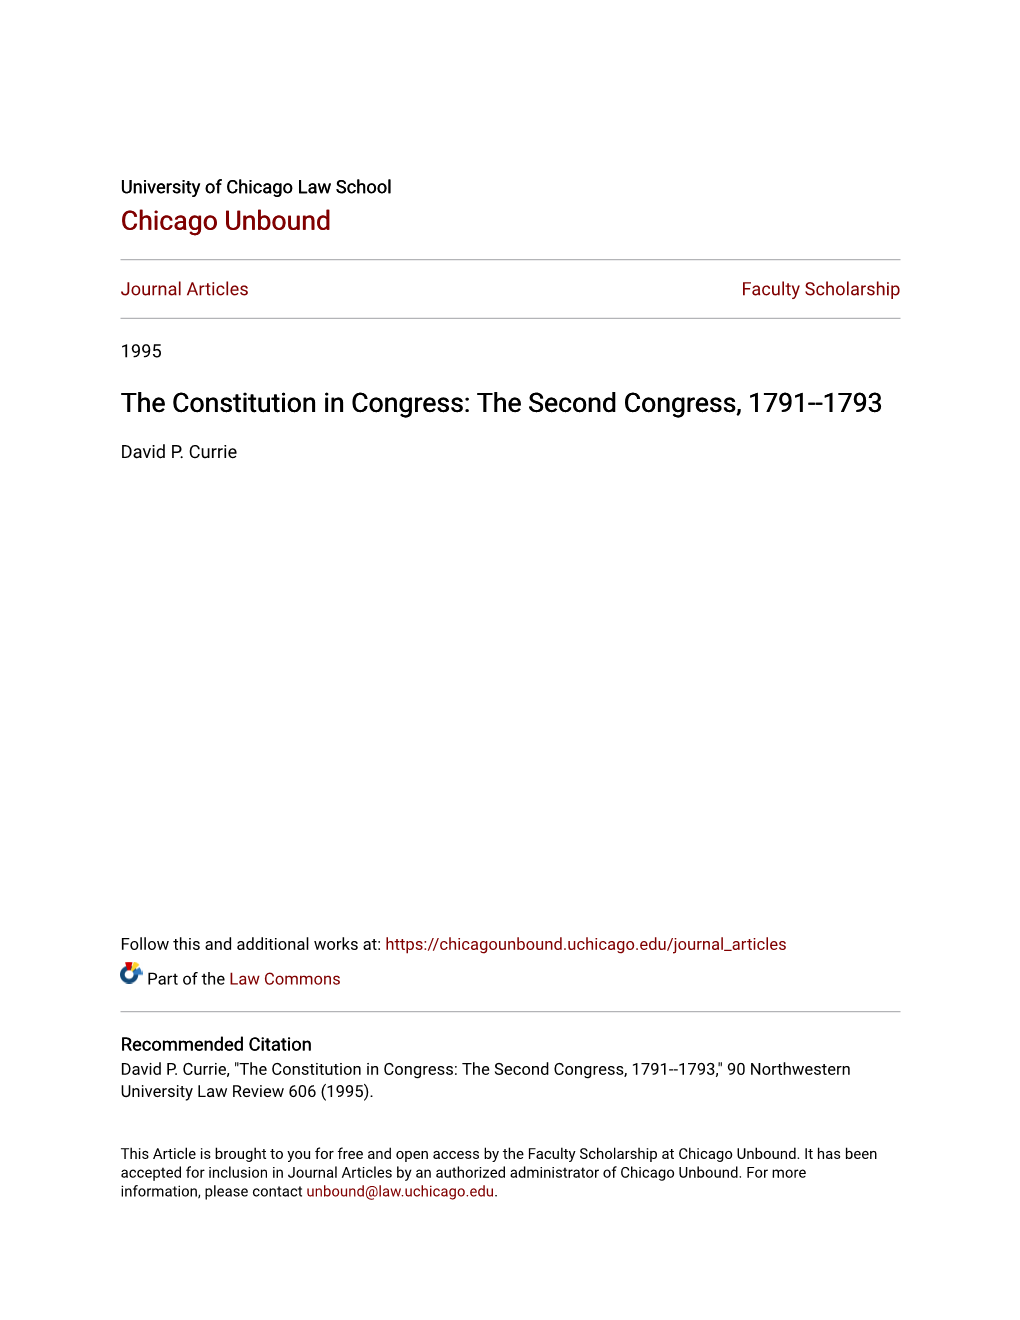 The Constitution in Congress: the Second Congress, 1791--1793